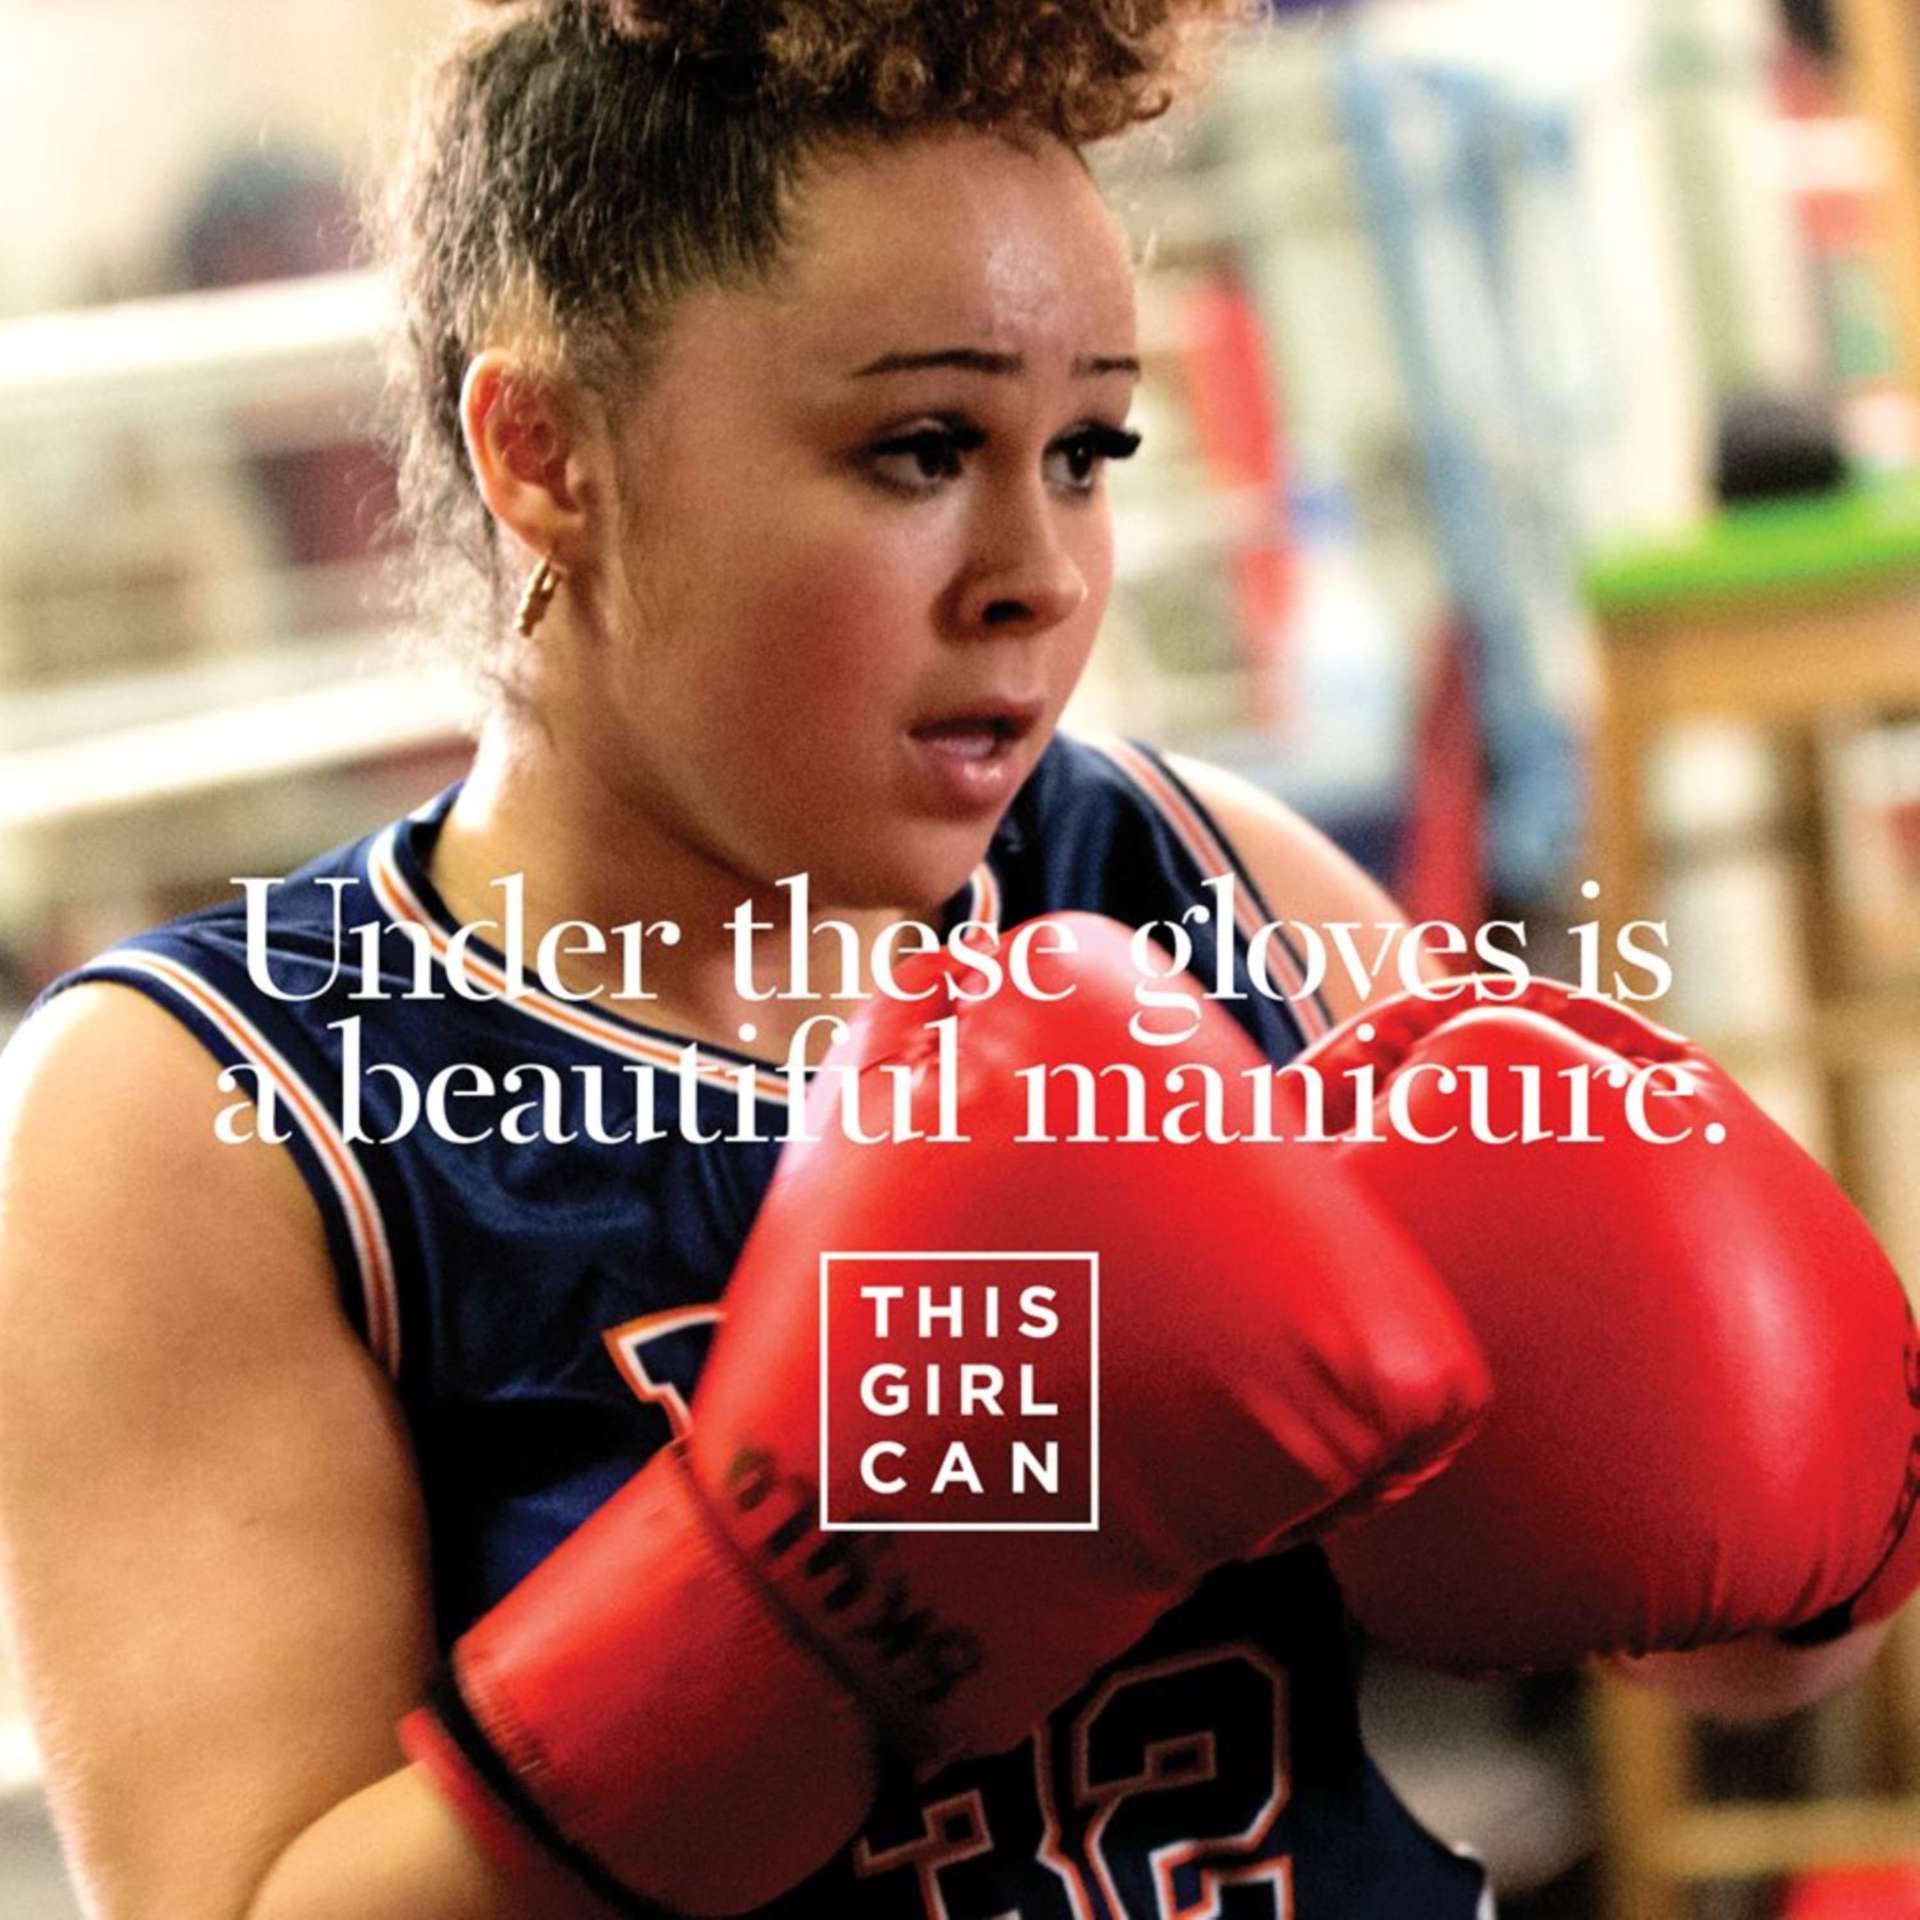 This Girl Can campaign featuring a female boxer with manicured nails